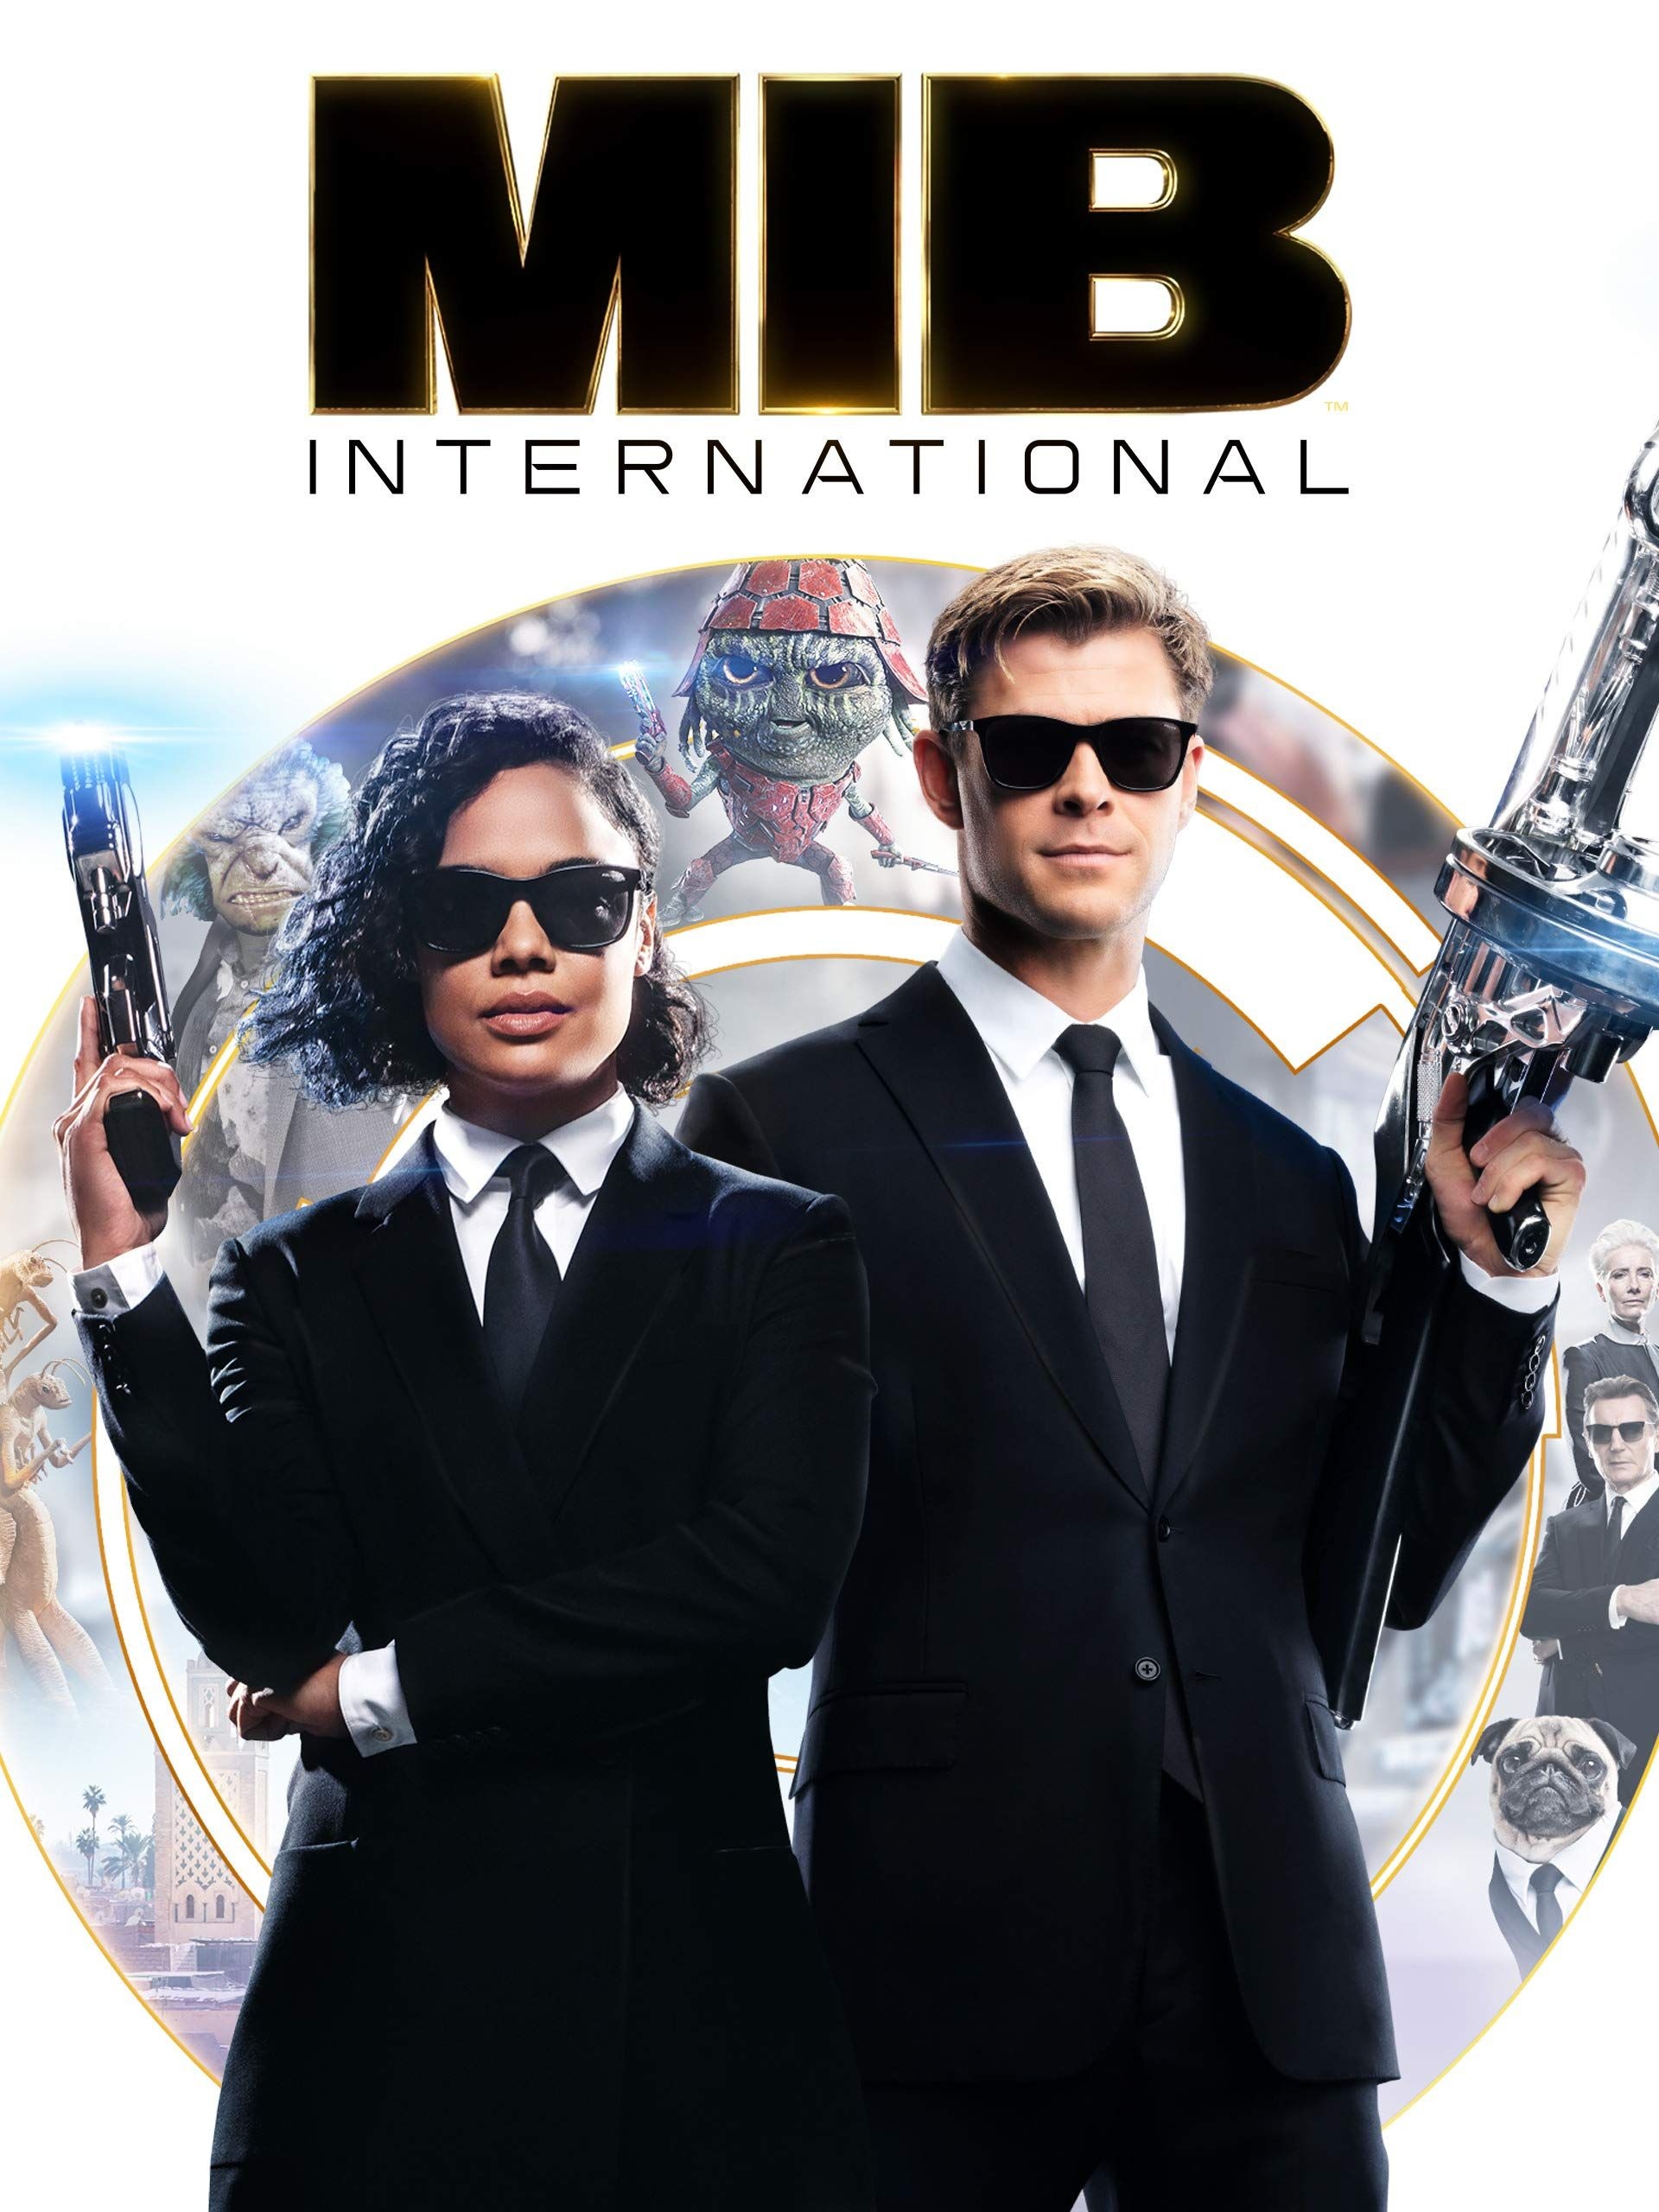 Chris Hemsworth, Men in Black, Pin on movies, Remember to see, 1920x2560 HD Handy